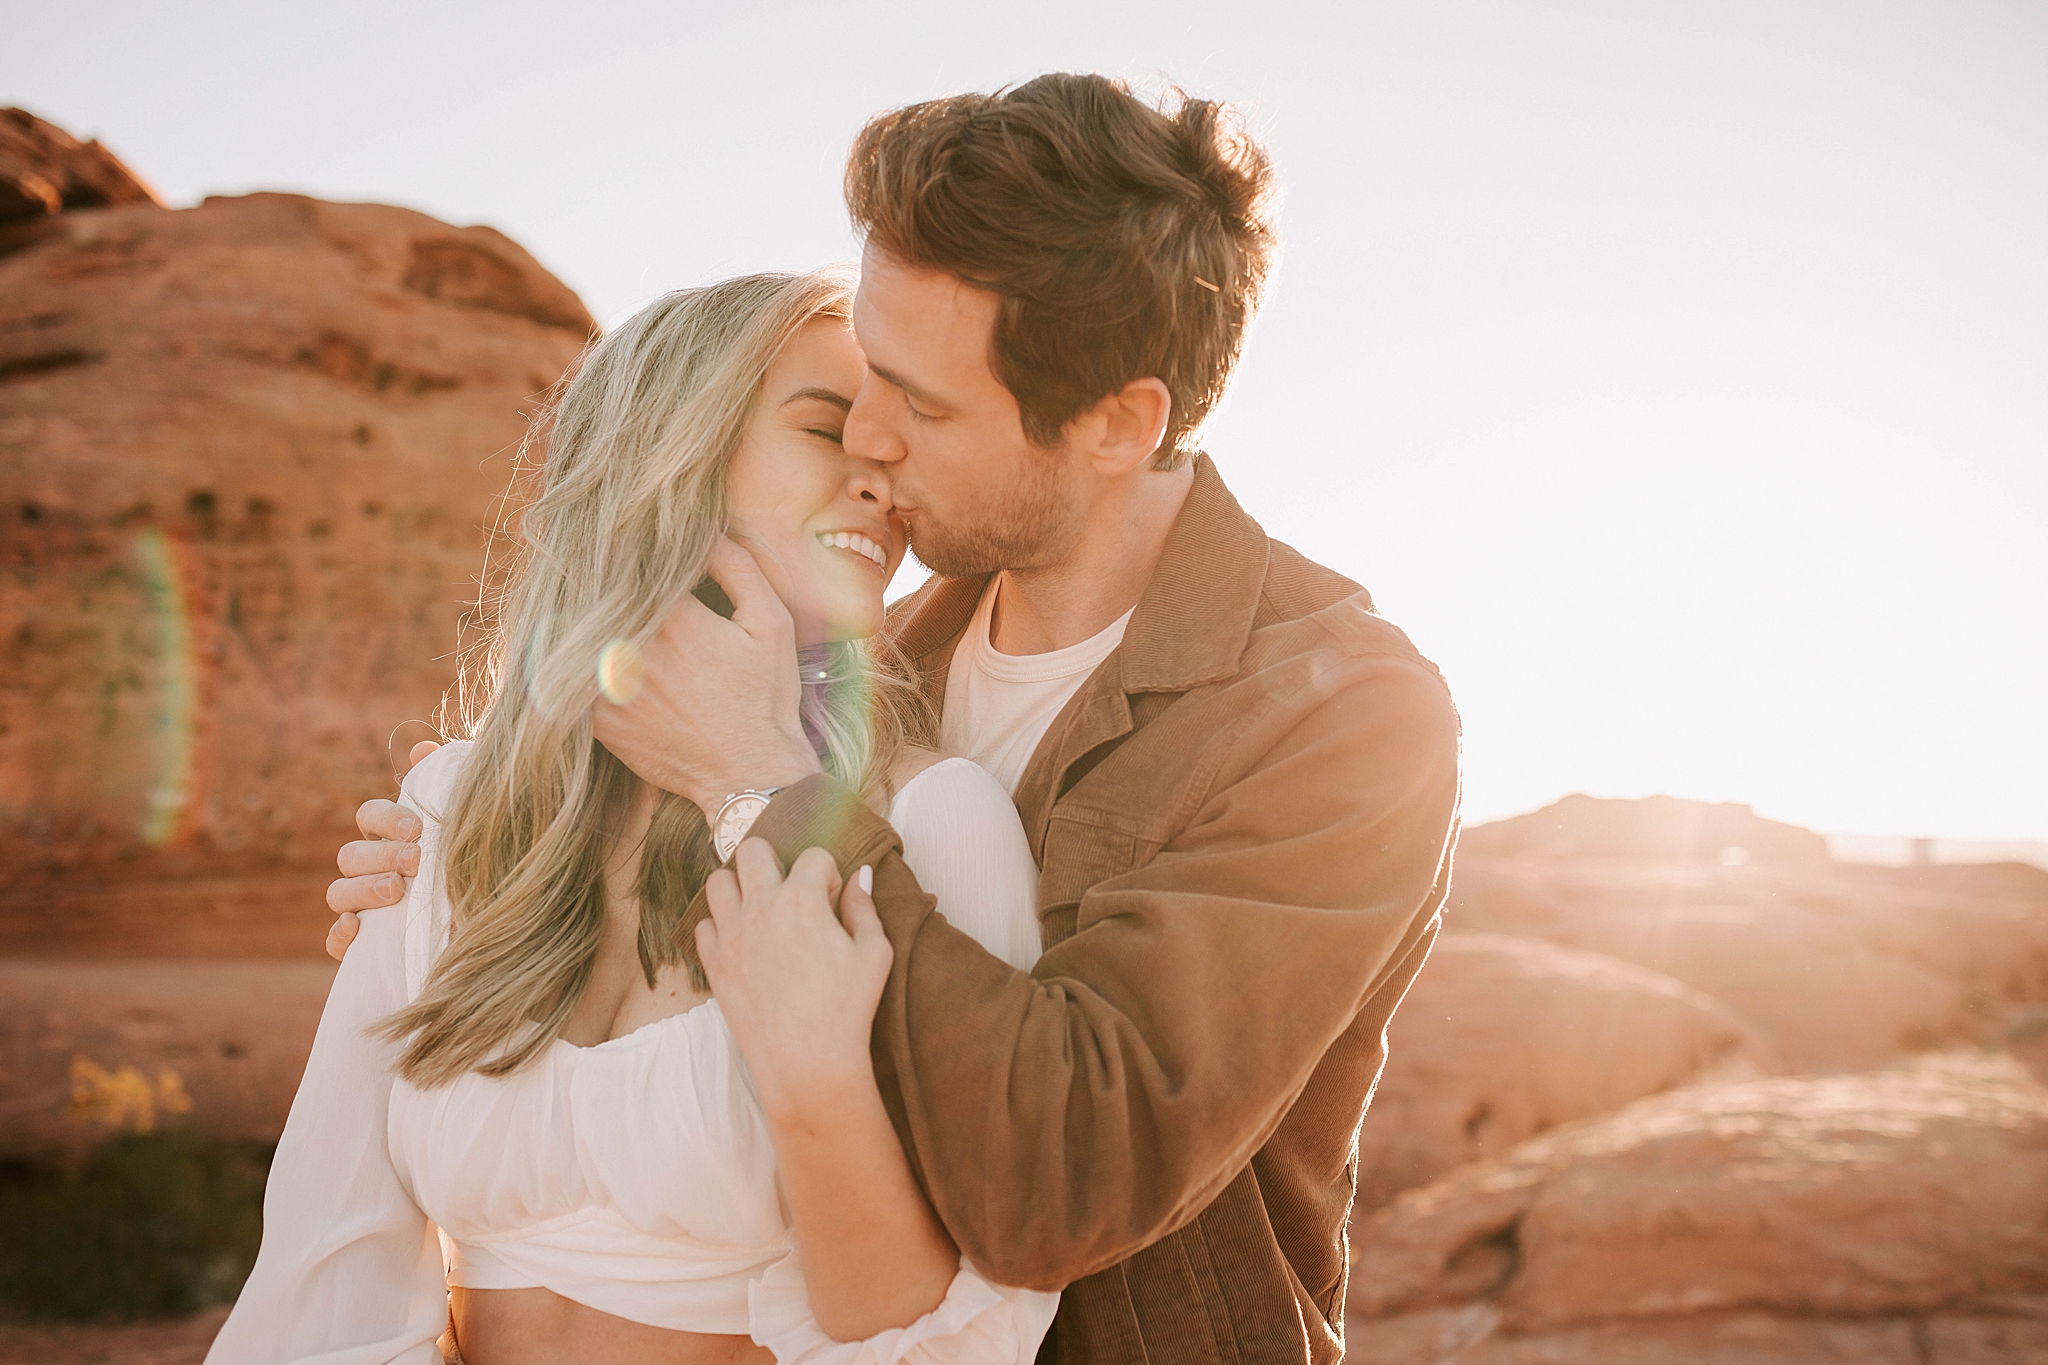 engagement photos taken in st george utah by adrian wayment photo